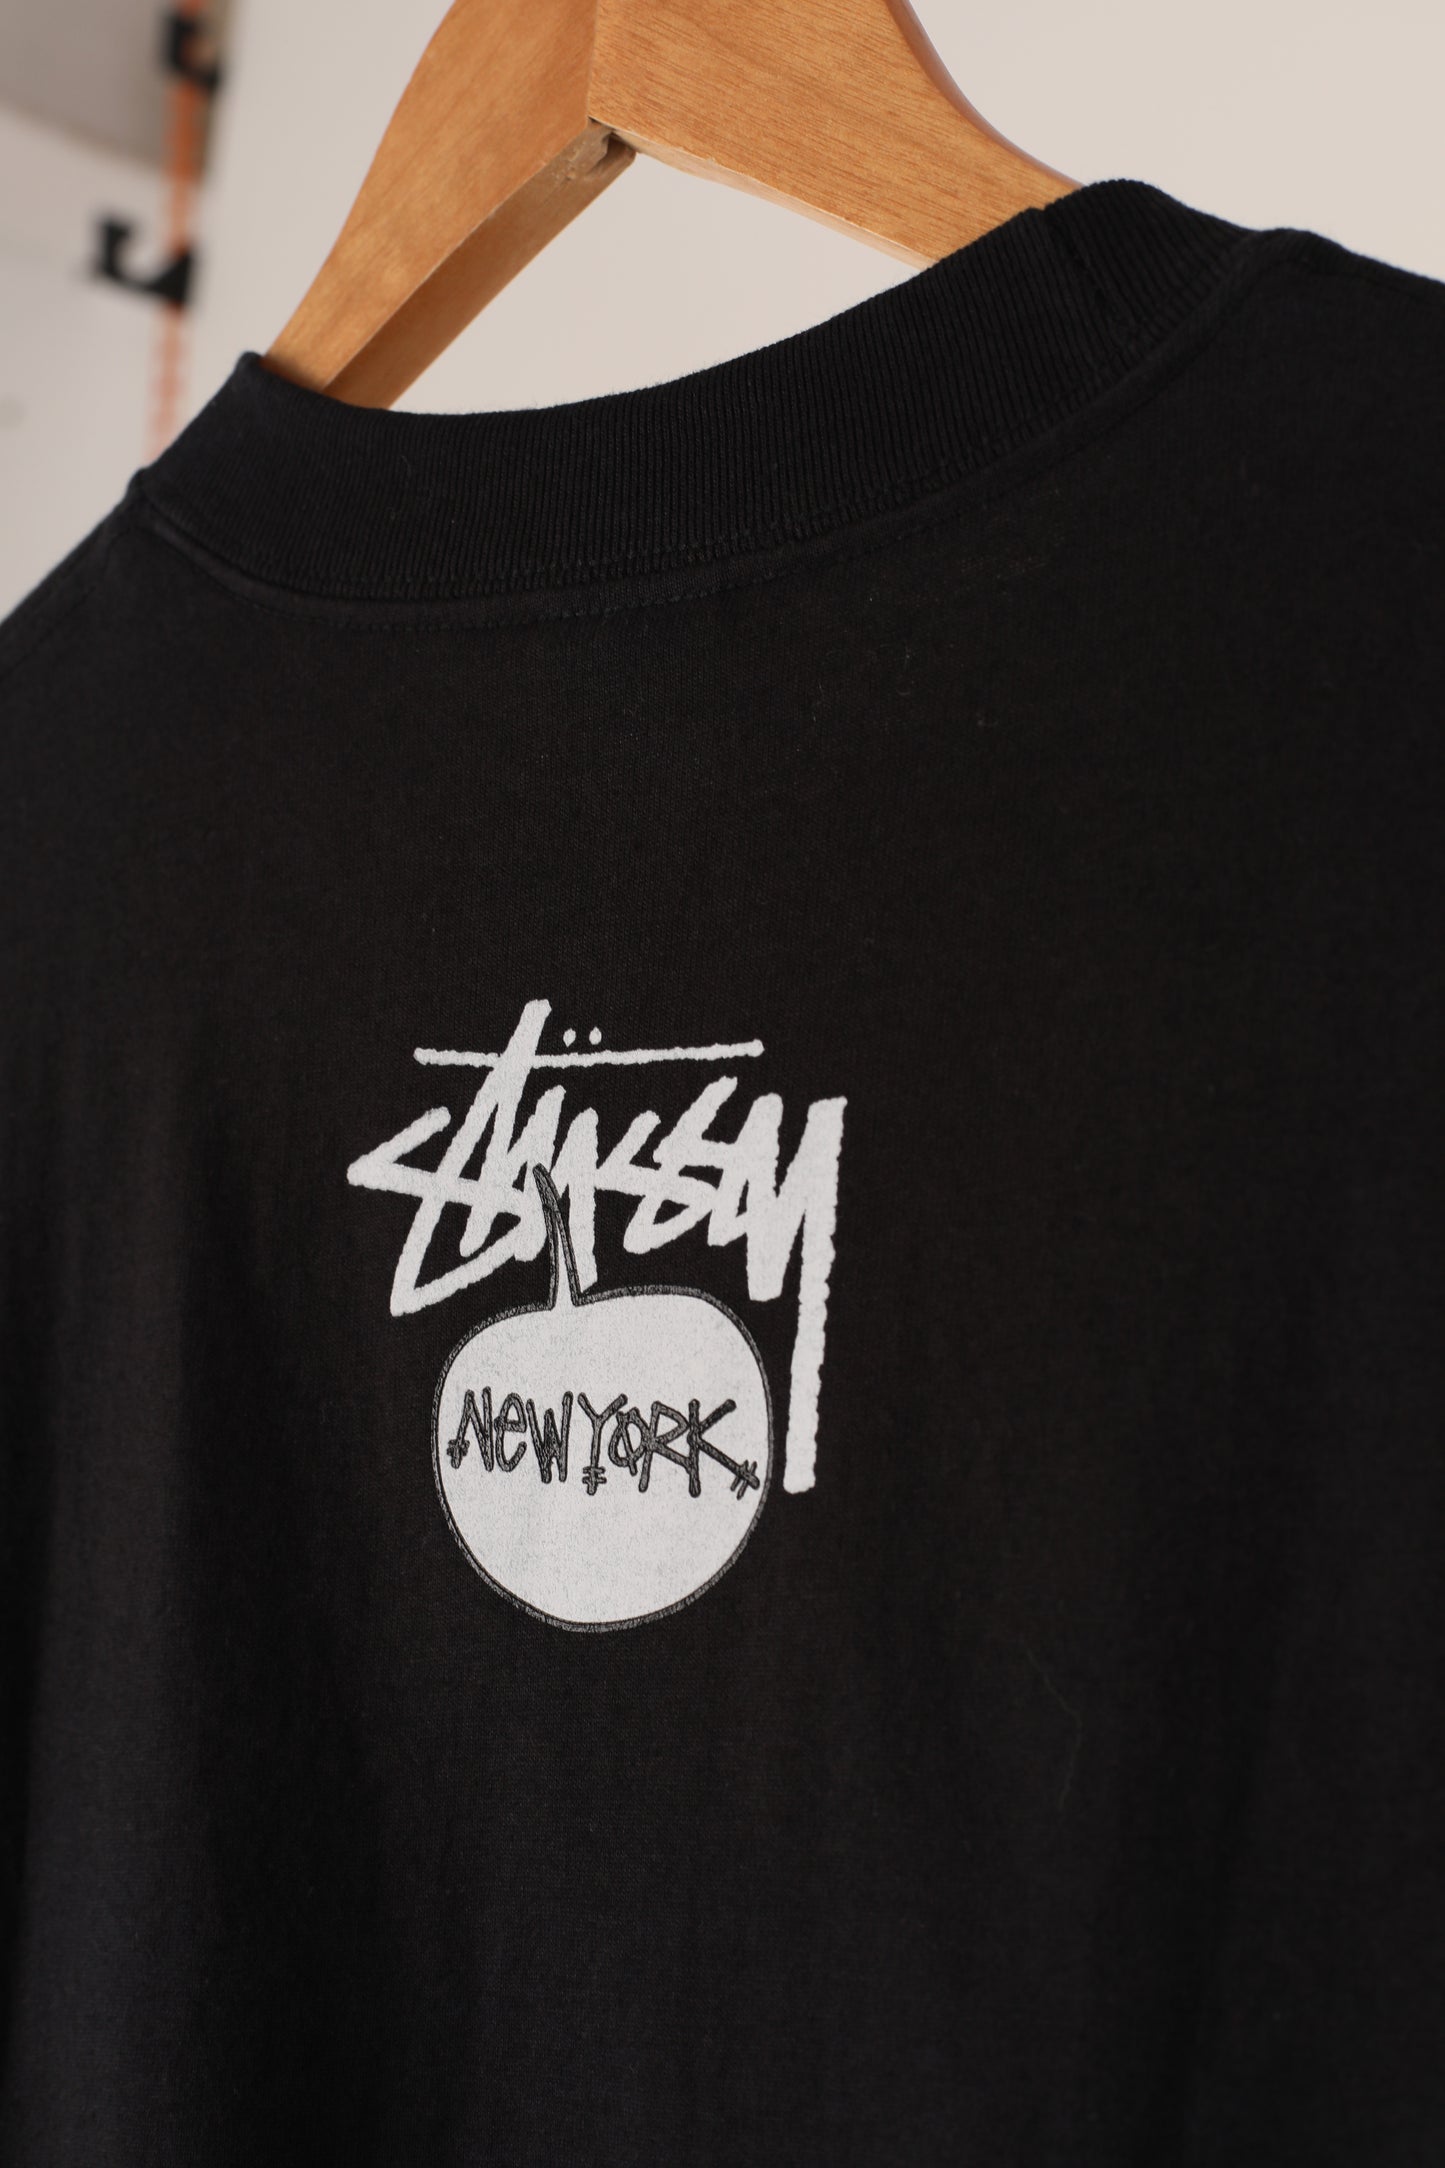 Deadstock Stussy Increase the Peace tshirt - Black (M)